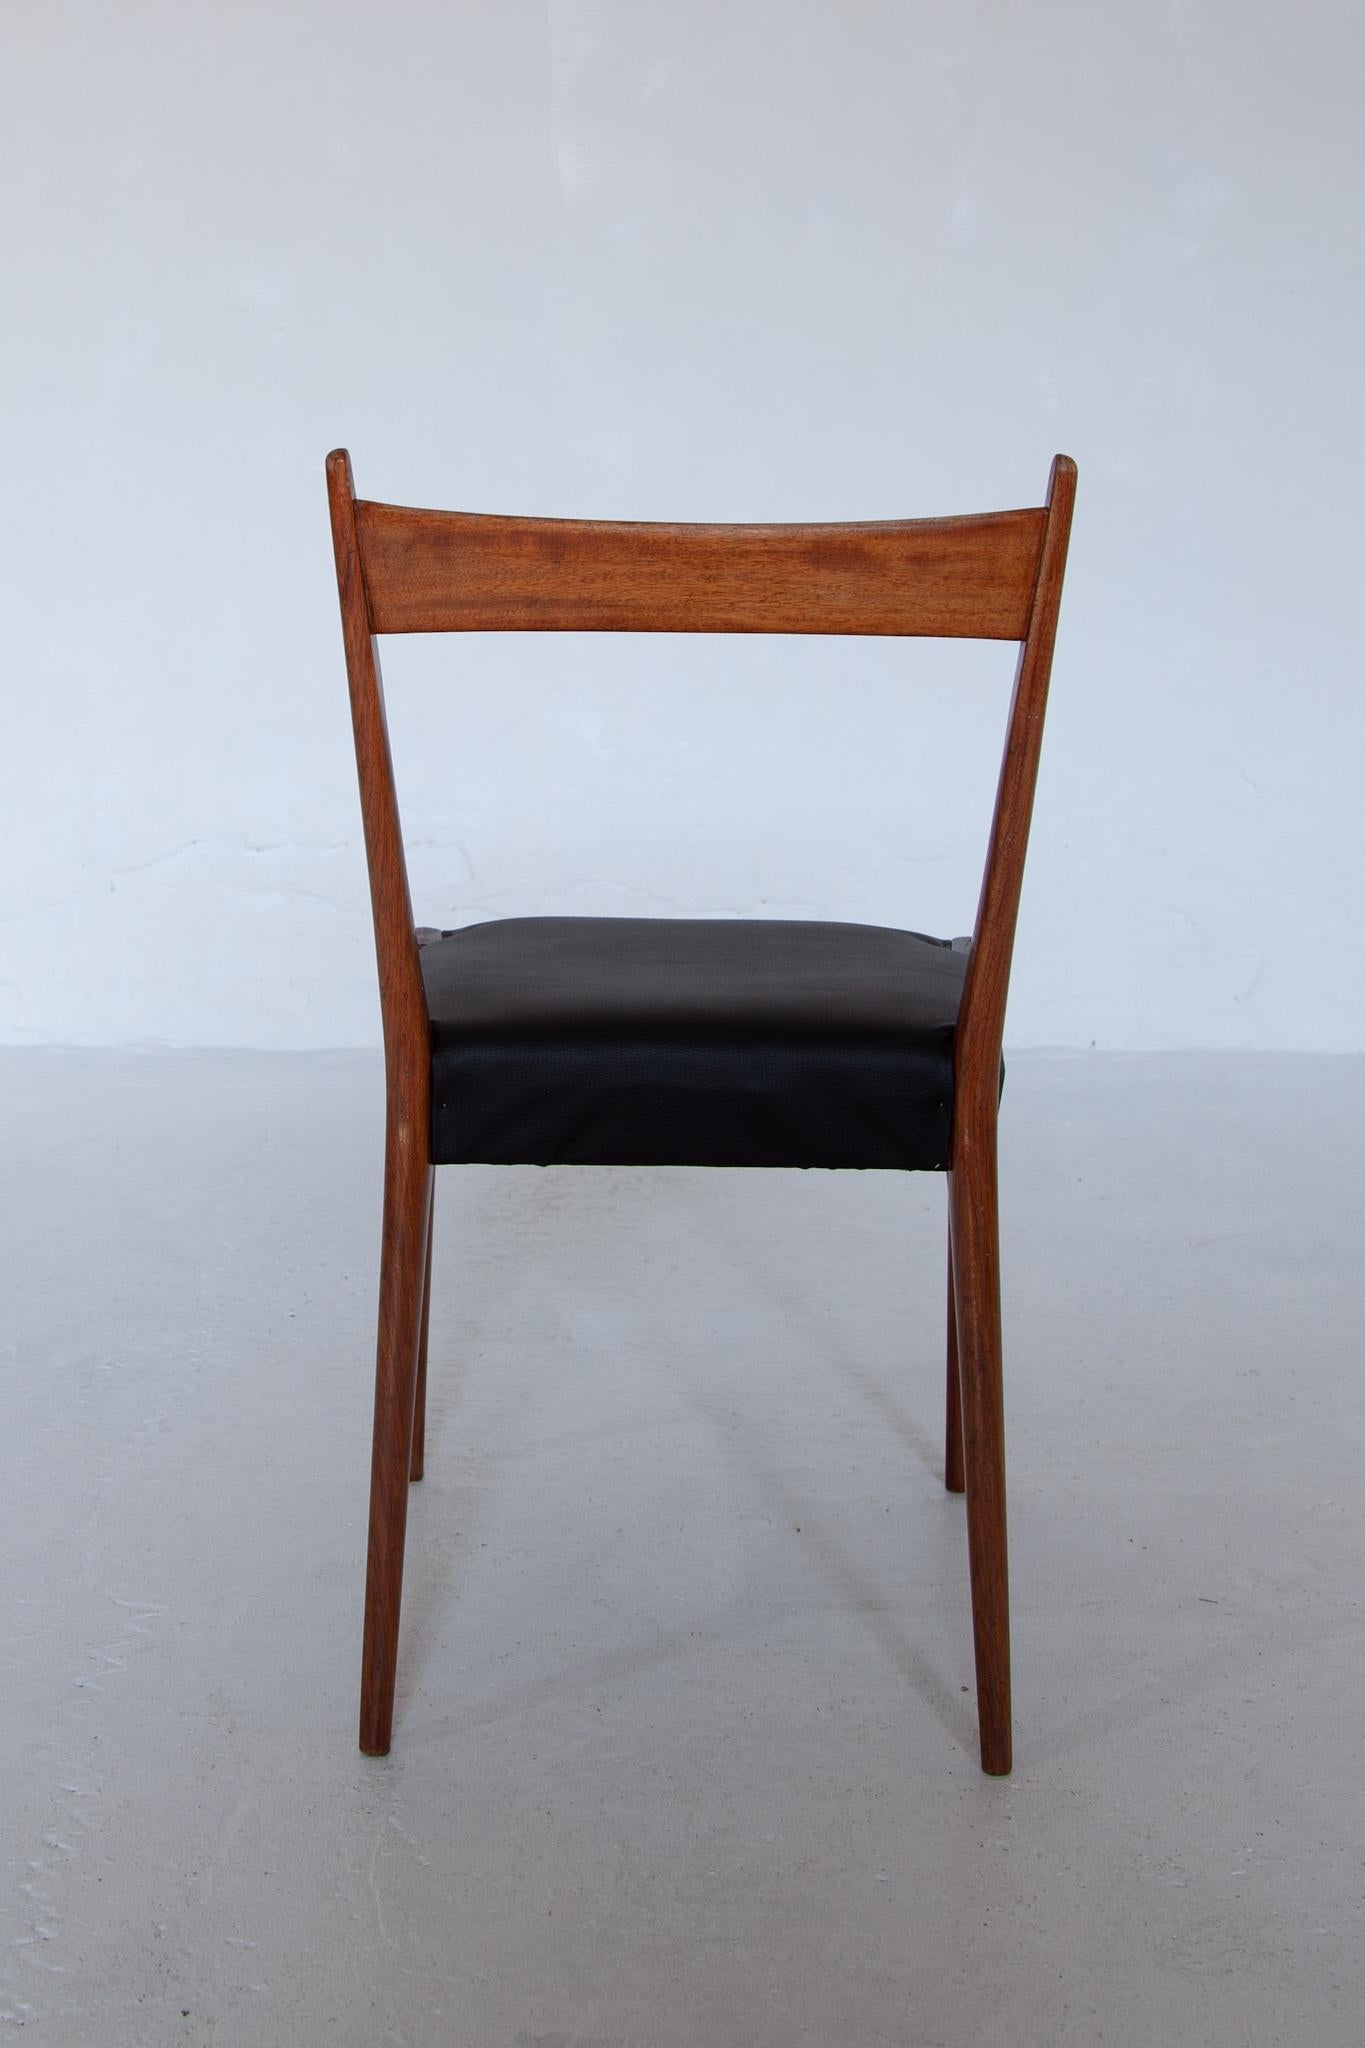 Mid-20th Century Set of Eight Dining Chairs 1958, Belgium for Belform designed by Alfred Hendrickx